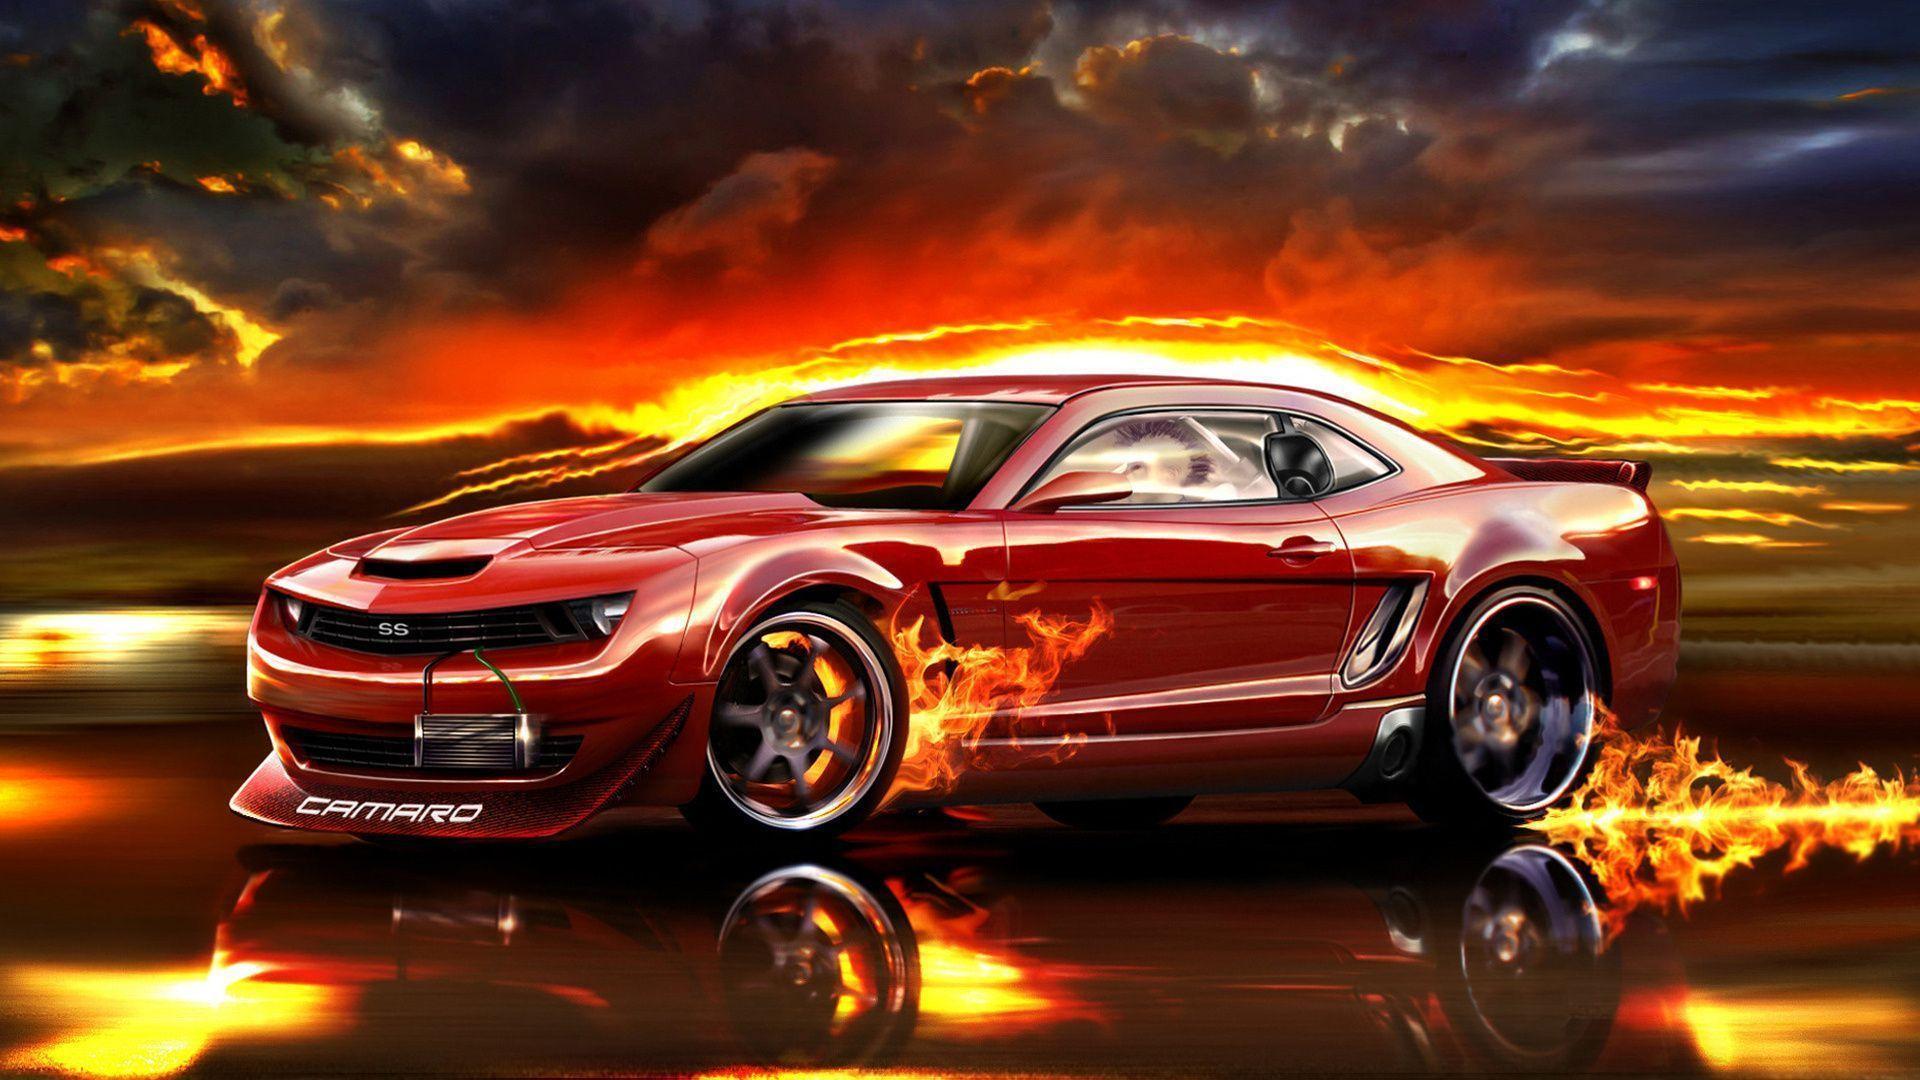 580 Chevrolet Camaro HD Wallpapers and Backgrounds